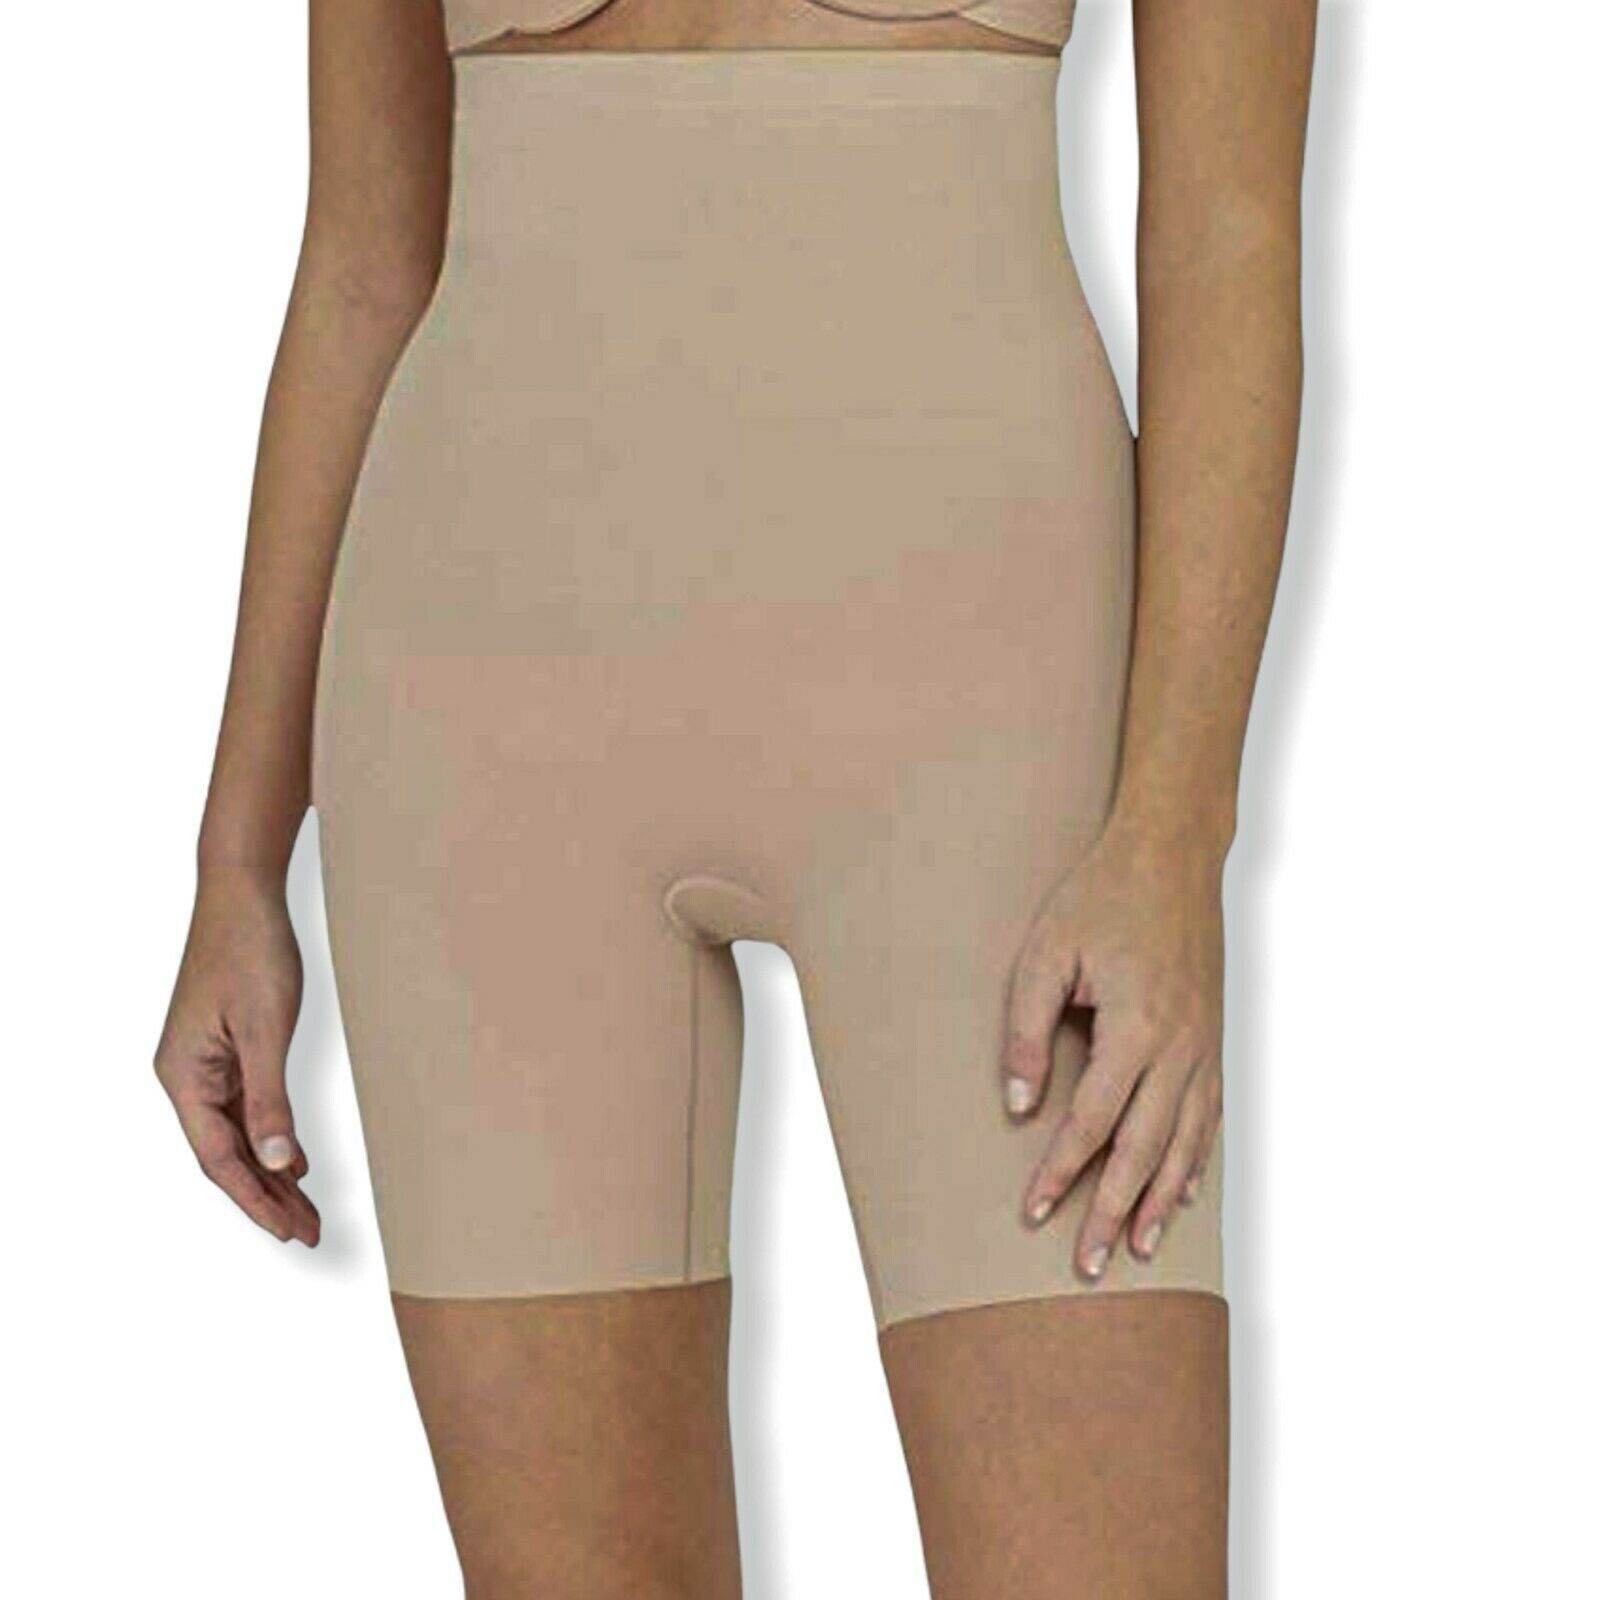 Primary image for Assets by Spanx Womens Size 2 Micro High Waist Mid-Thigh Shaper Color Buff 58F42